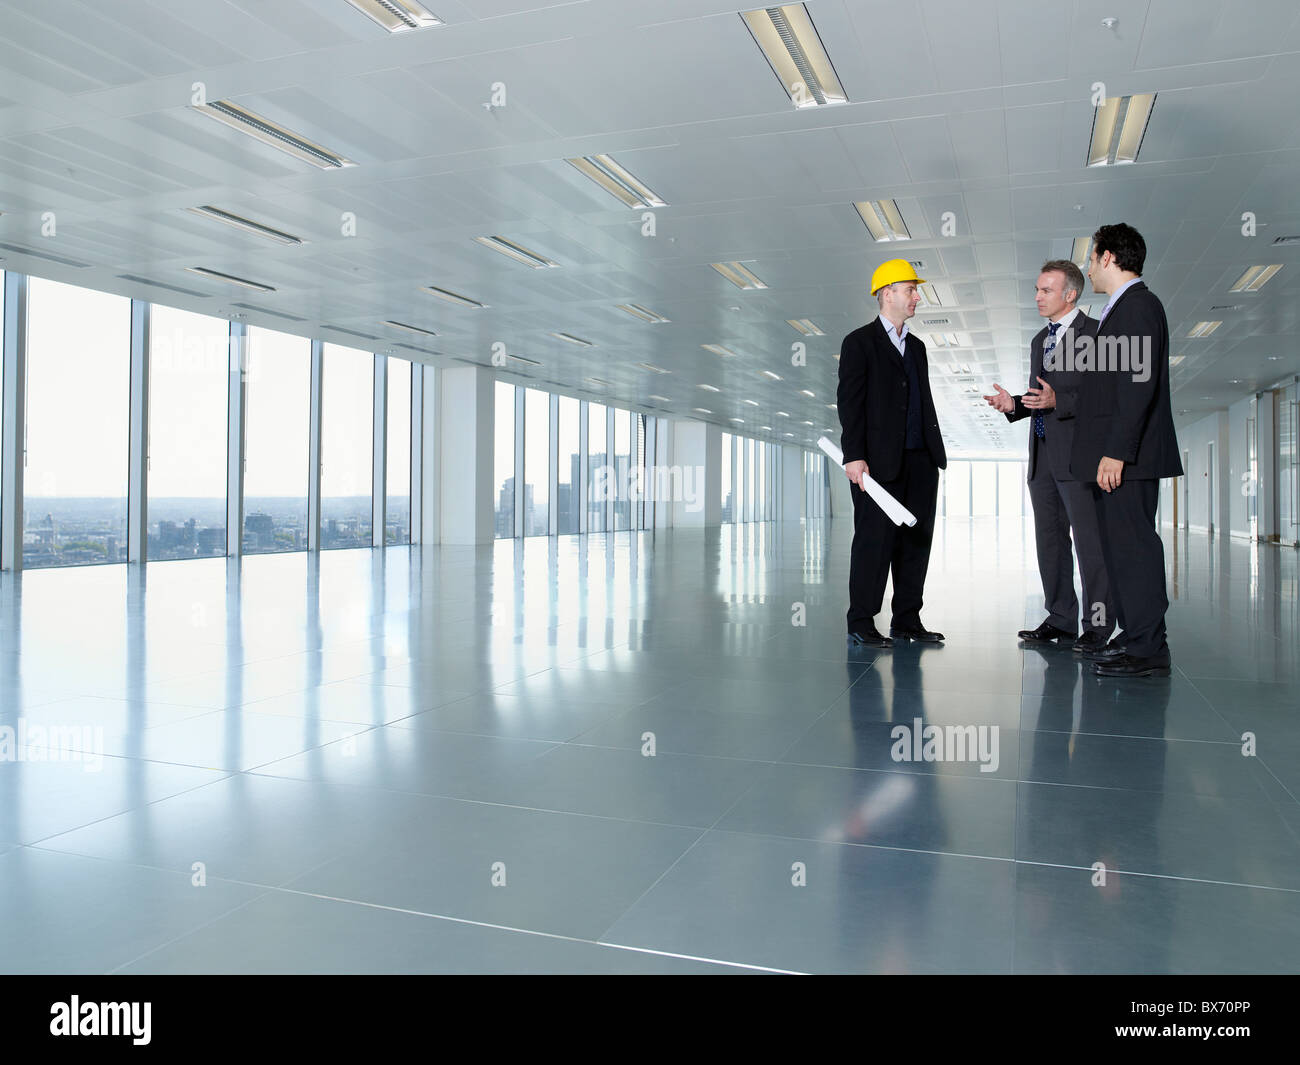 Three executives, one in hardhat, in empty office space Stock Photo